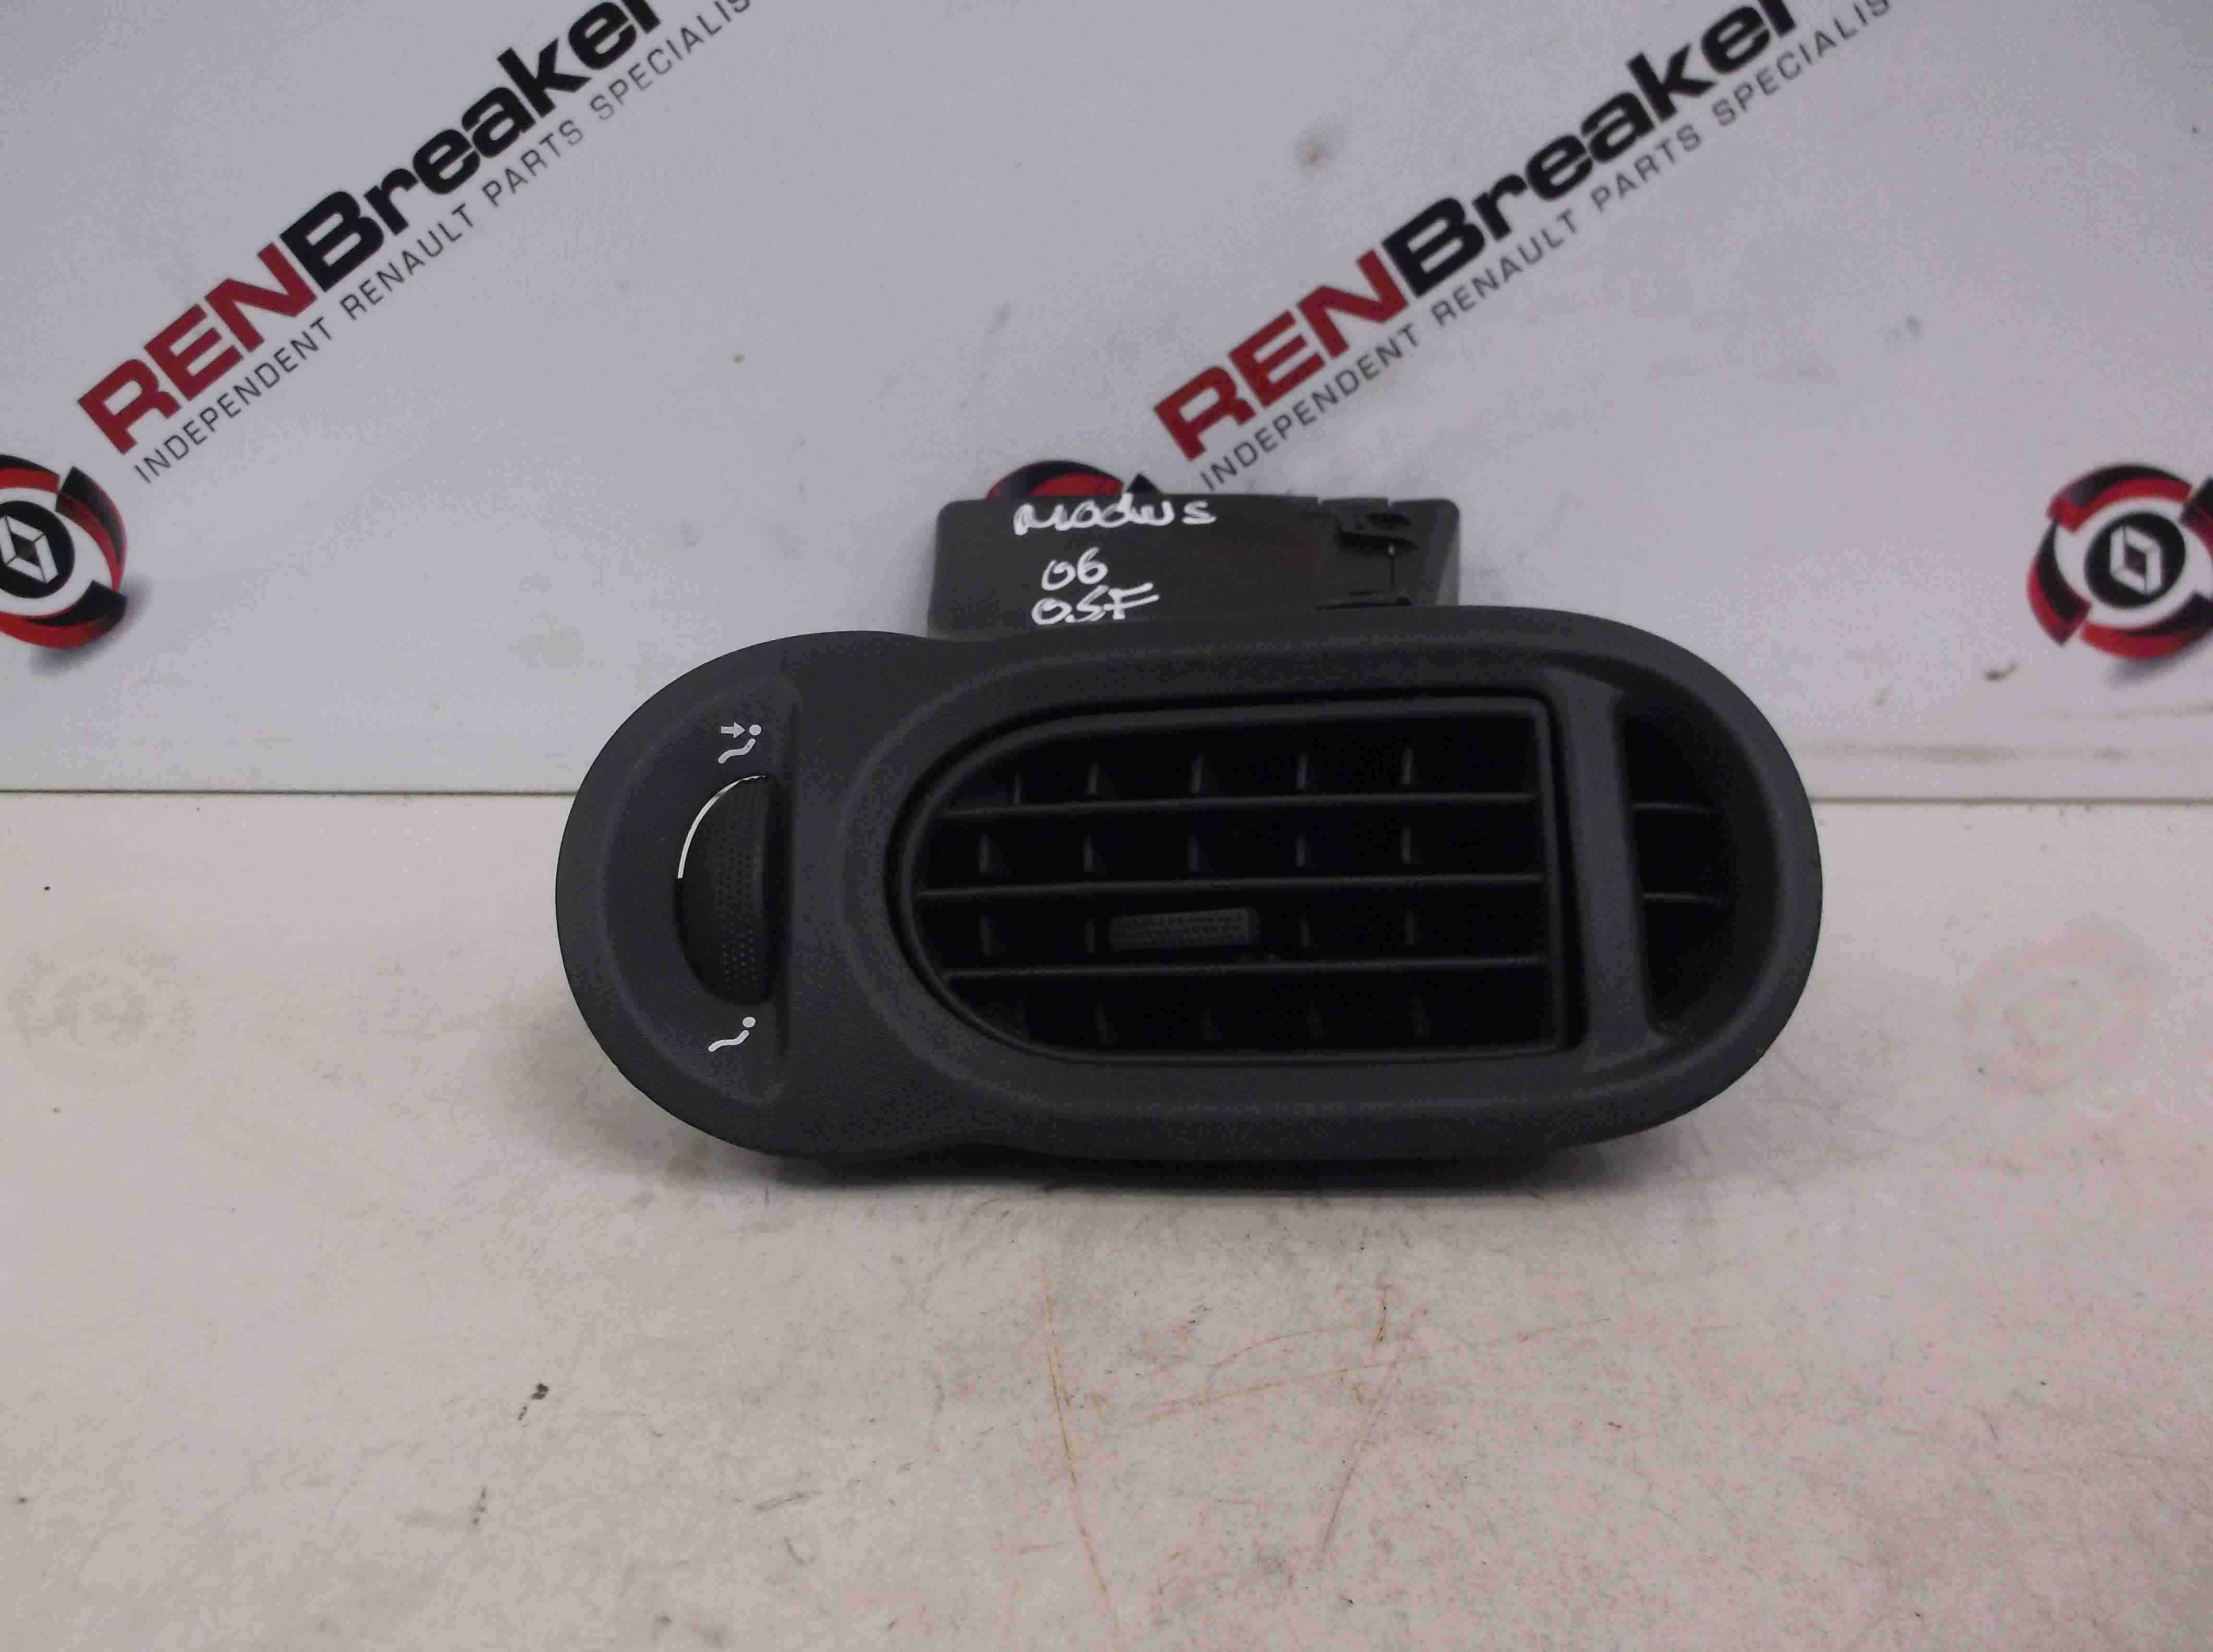 Renault Modus 2004-2008 Drivers OSF Front Heater Vent